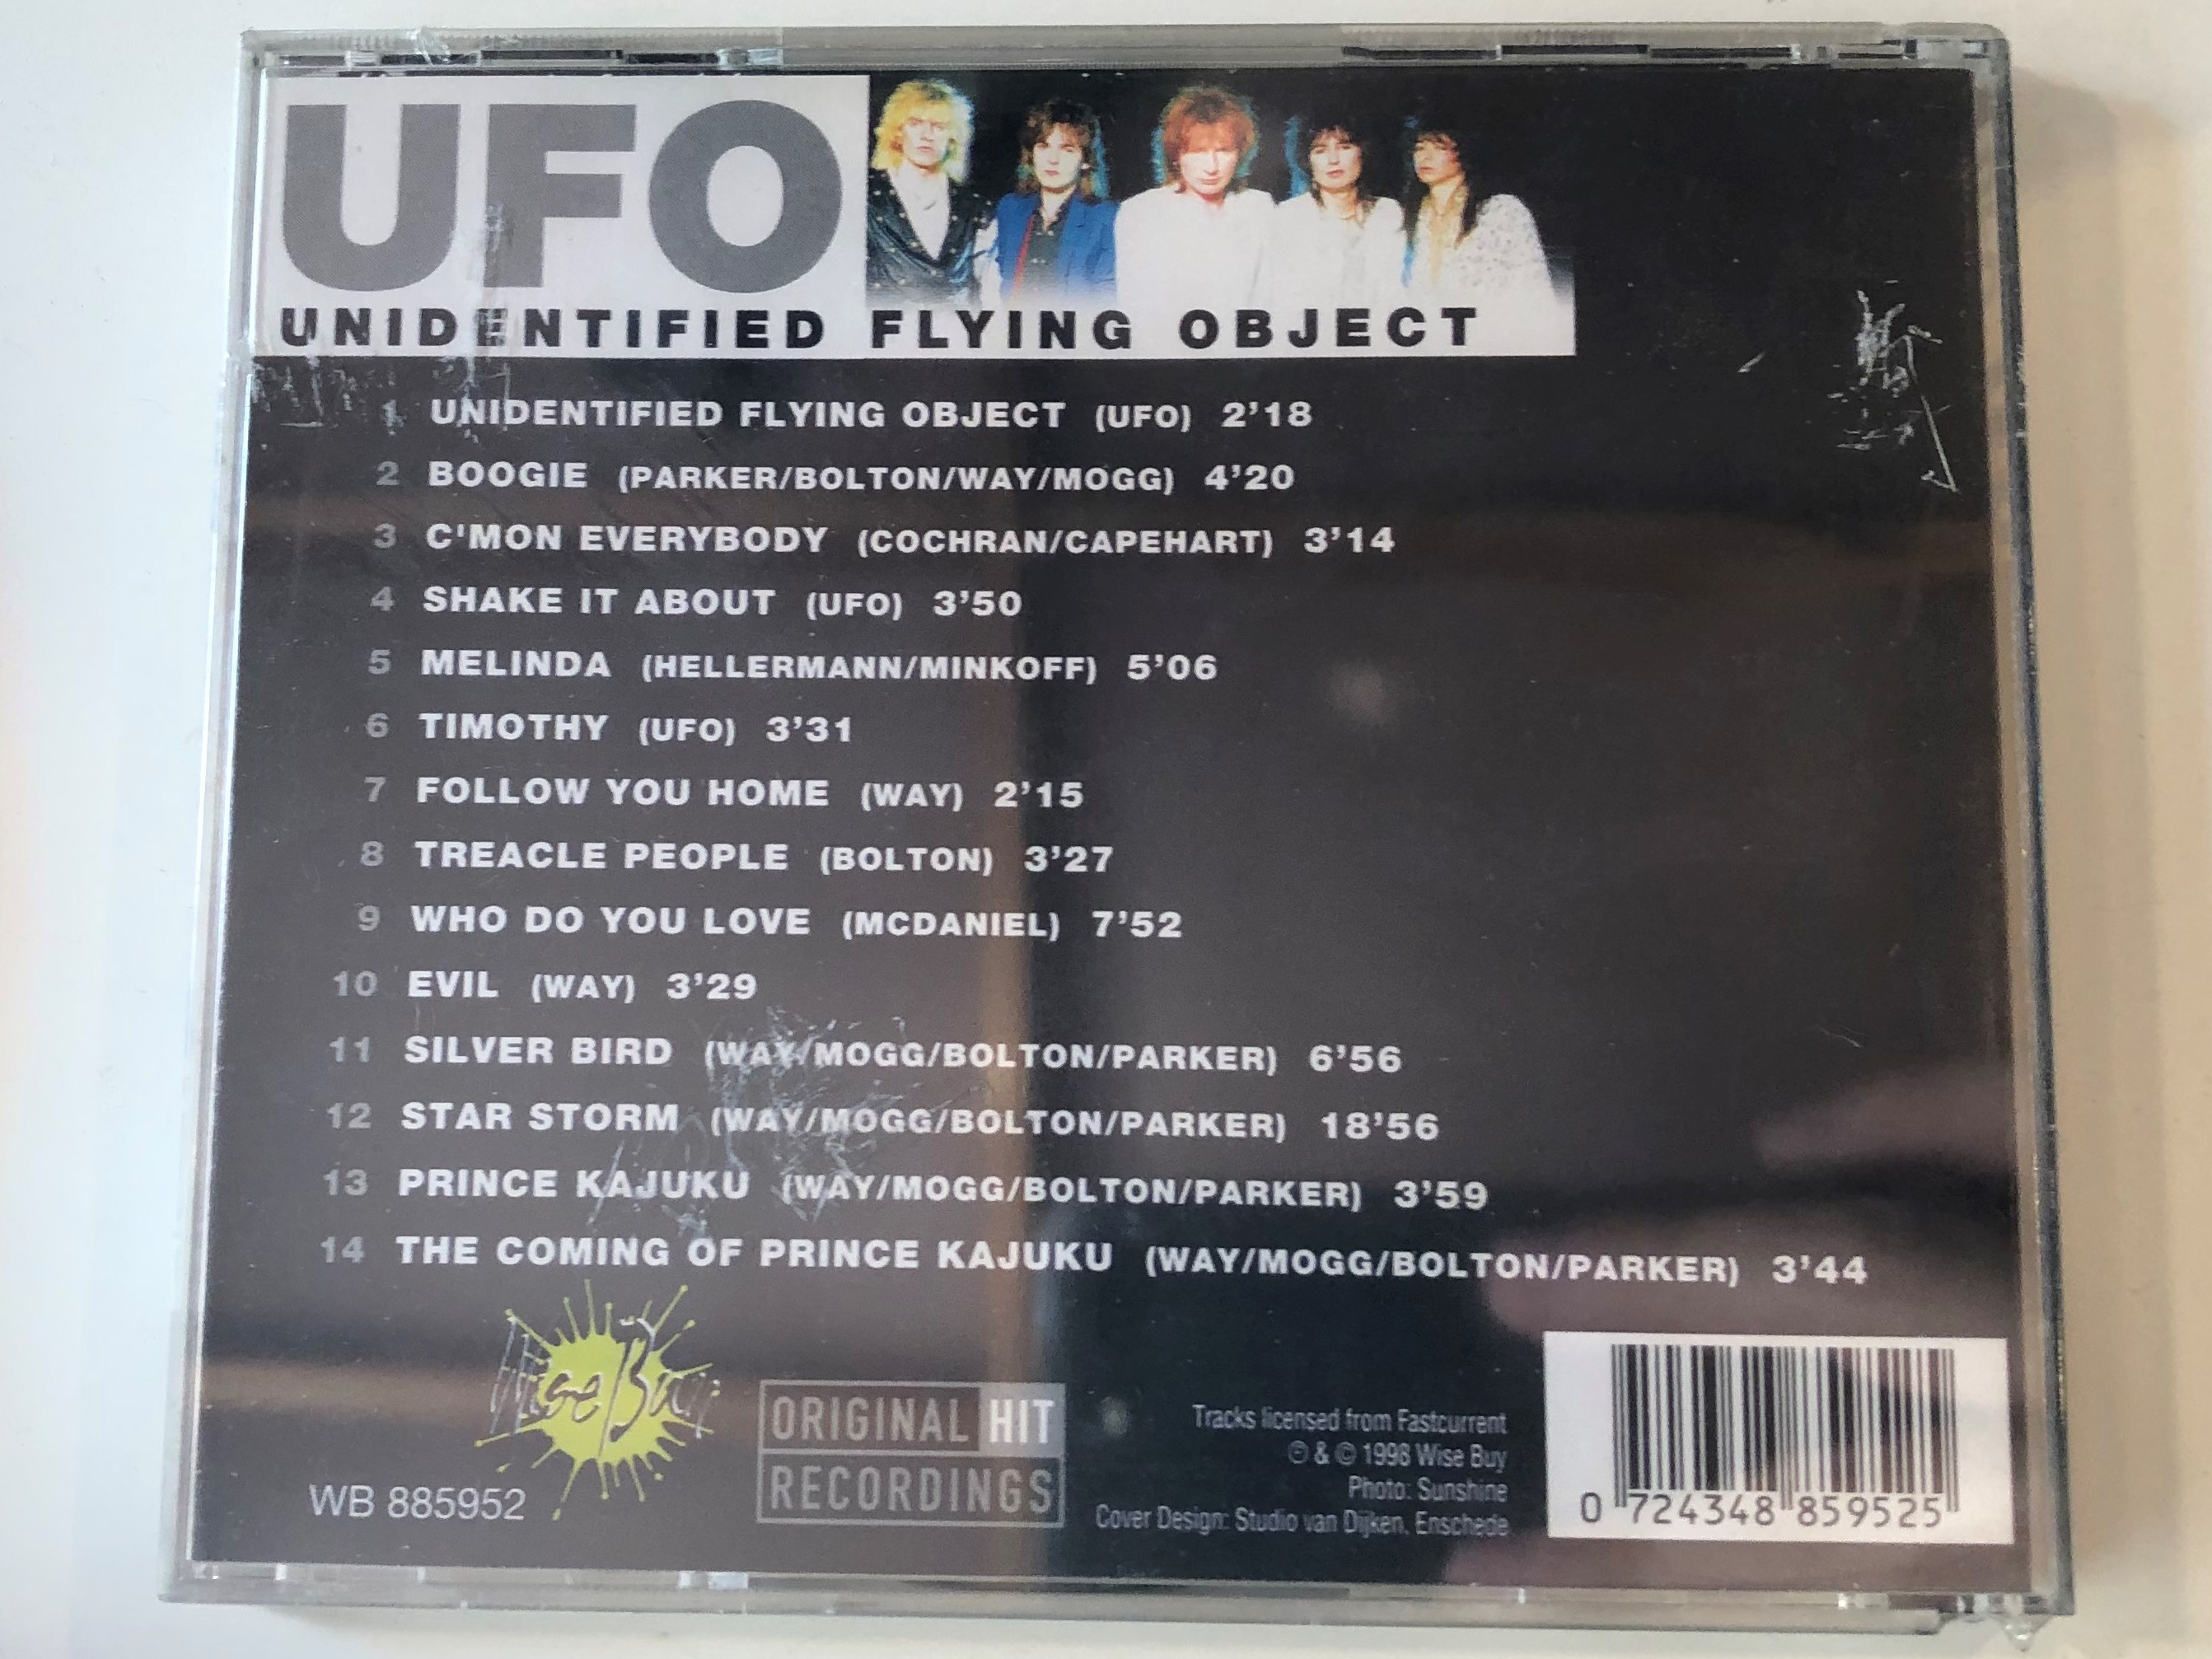 ufo-unidentified-flying-object-boogie-c-mon-everybody-who-do-you-love-original-hit-recordings-wise-buy-audio-cd-1998-wb-885952-2-.jpg